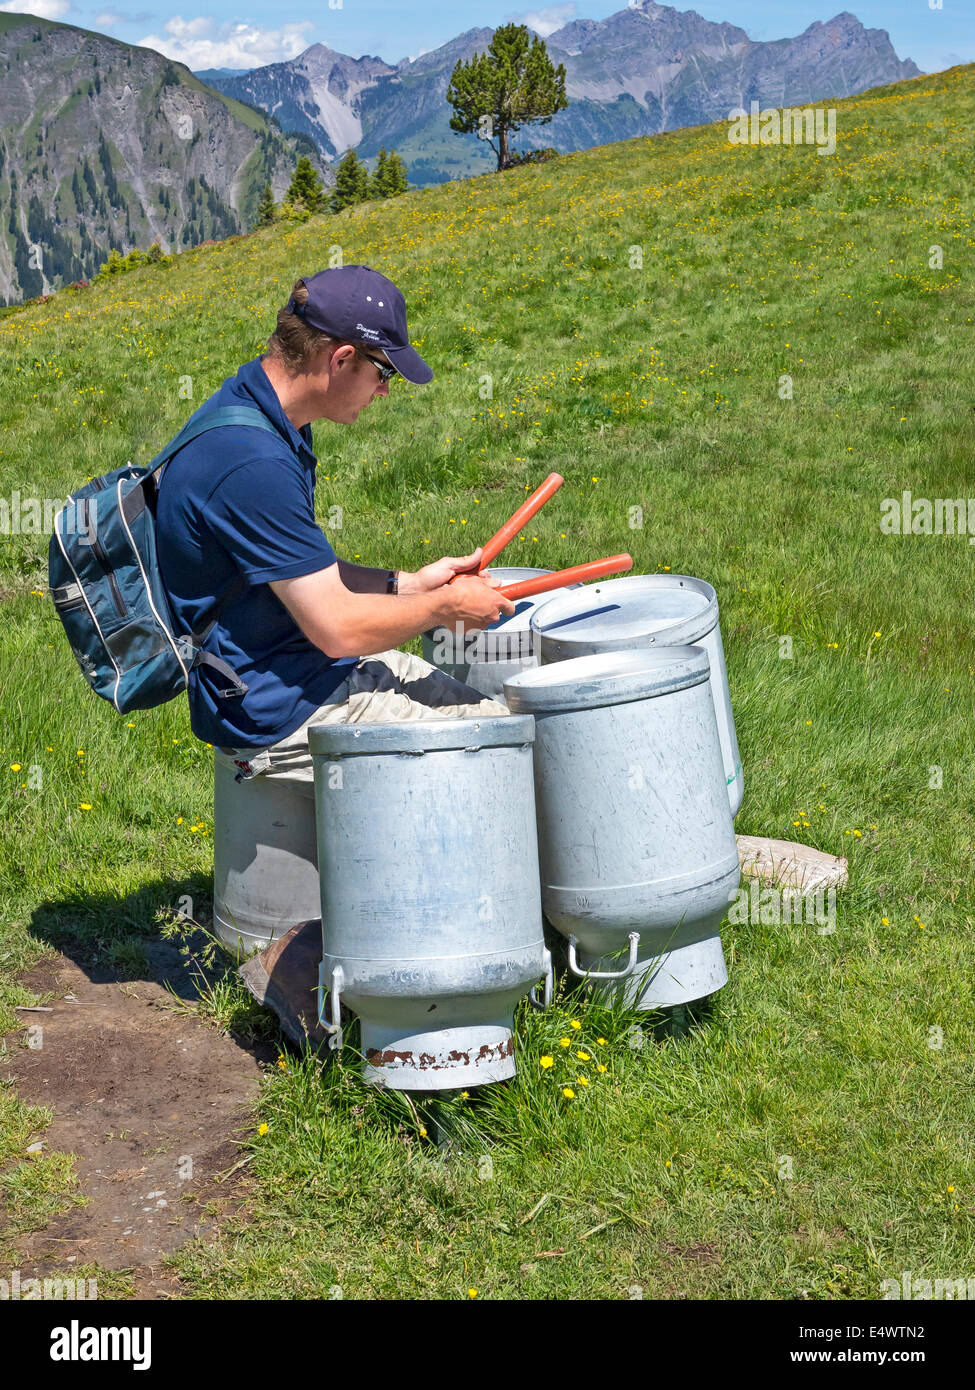 A man playing upturned milk churns as drums in a Swiss alpine meadow. Stock Photo